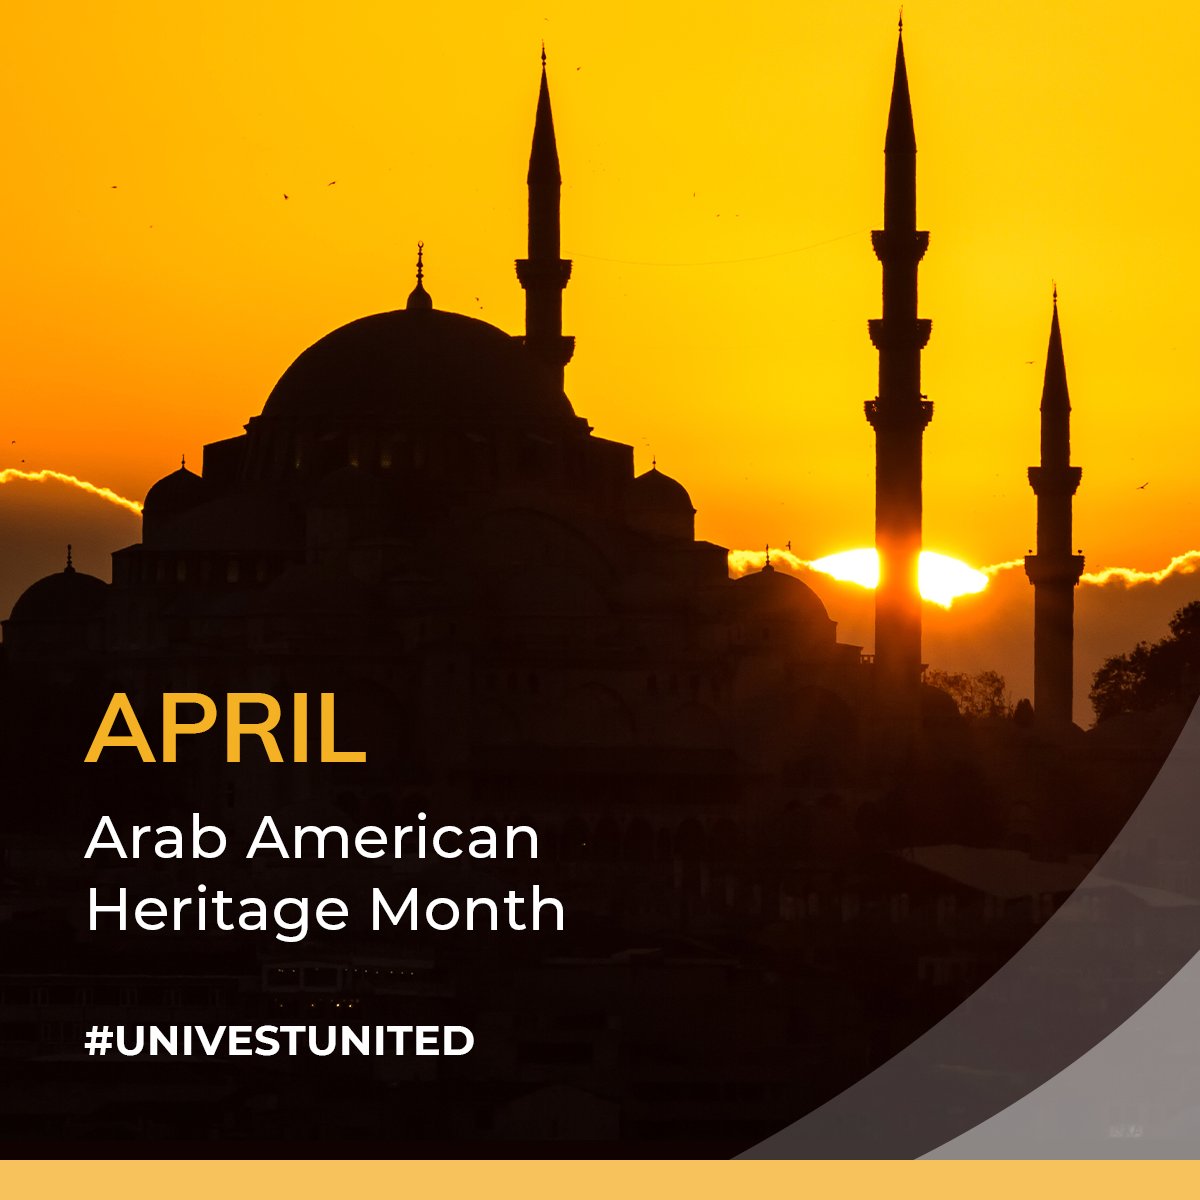 April is Arab American Heritage Month, a time to recognize the rich culture, traditions and achievements of Arab Americans and appreciate the diverse tapestry of our community. #UnivestUnited #ArabAmericanHeritageMonth